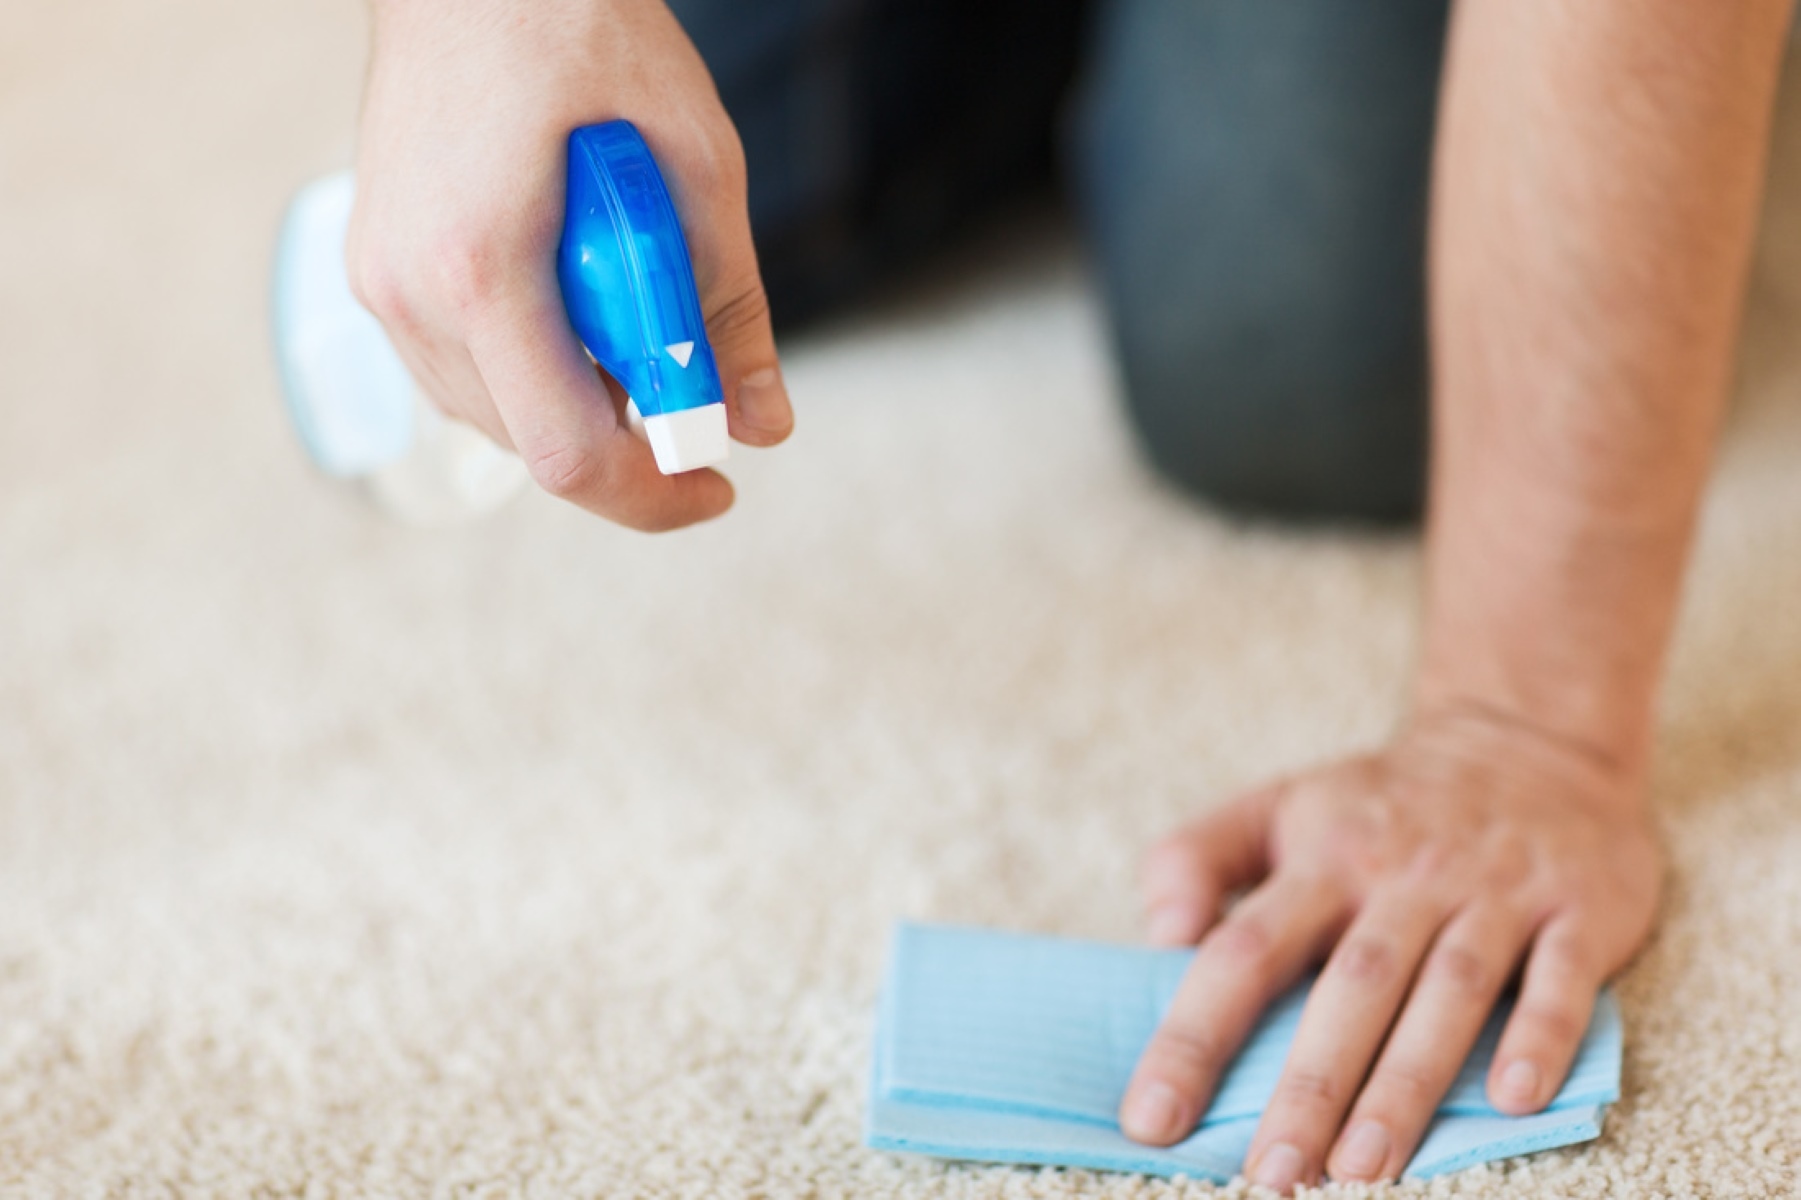 What Is A Good Carpet Deodorizer?